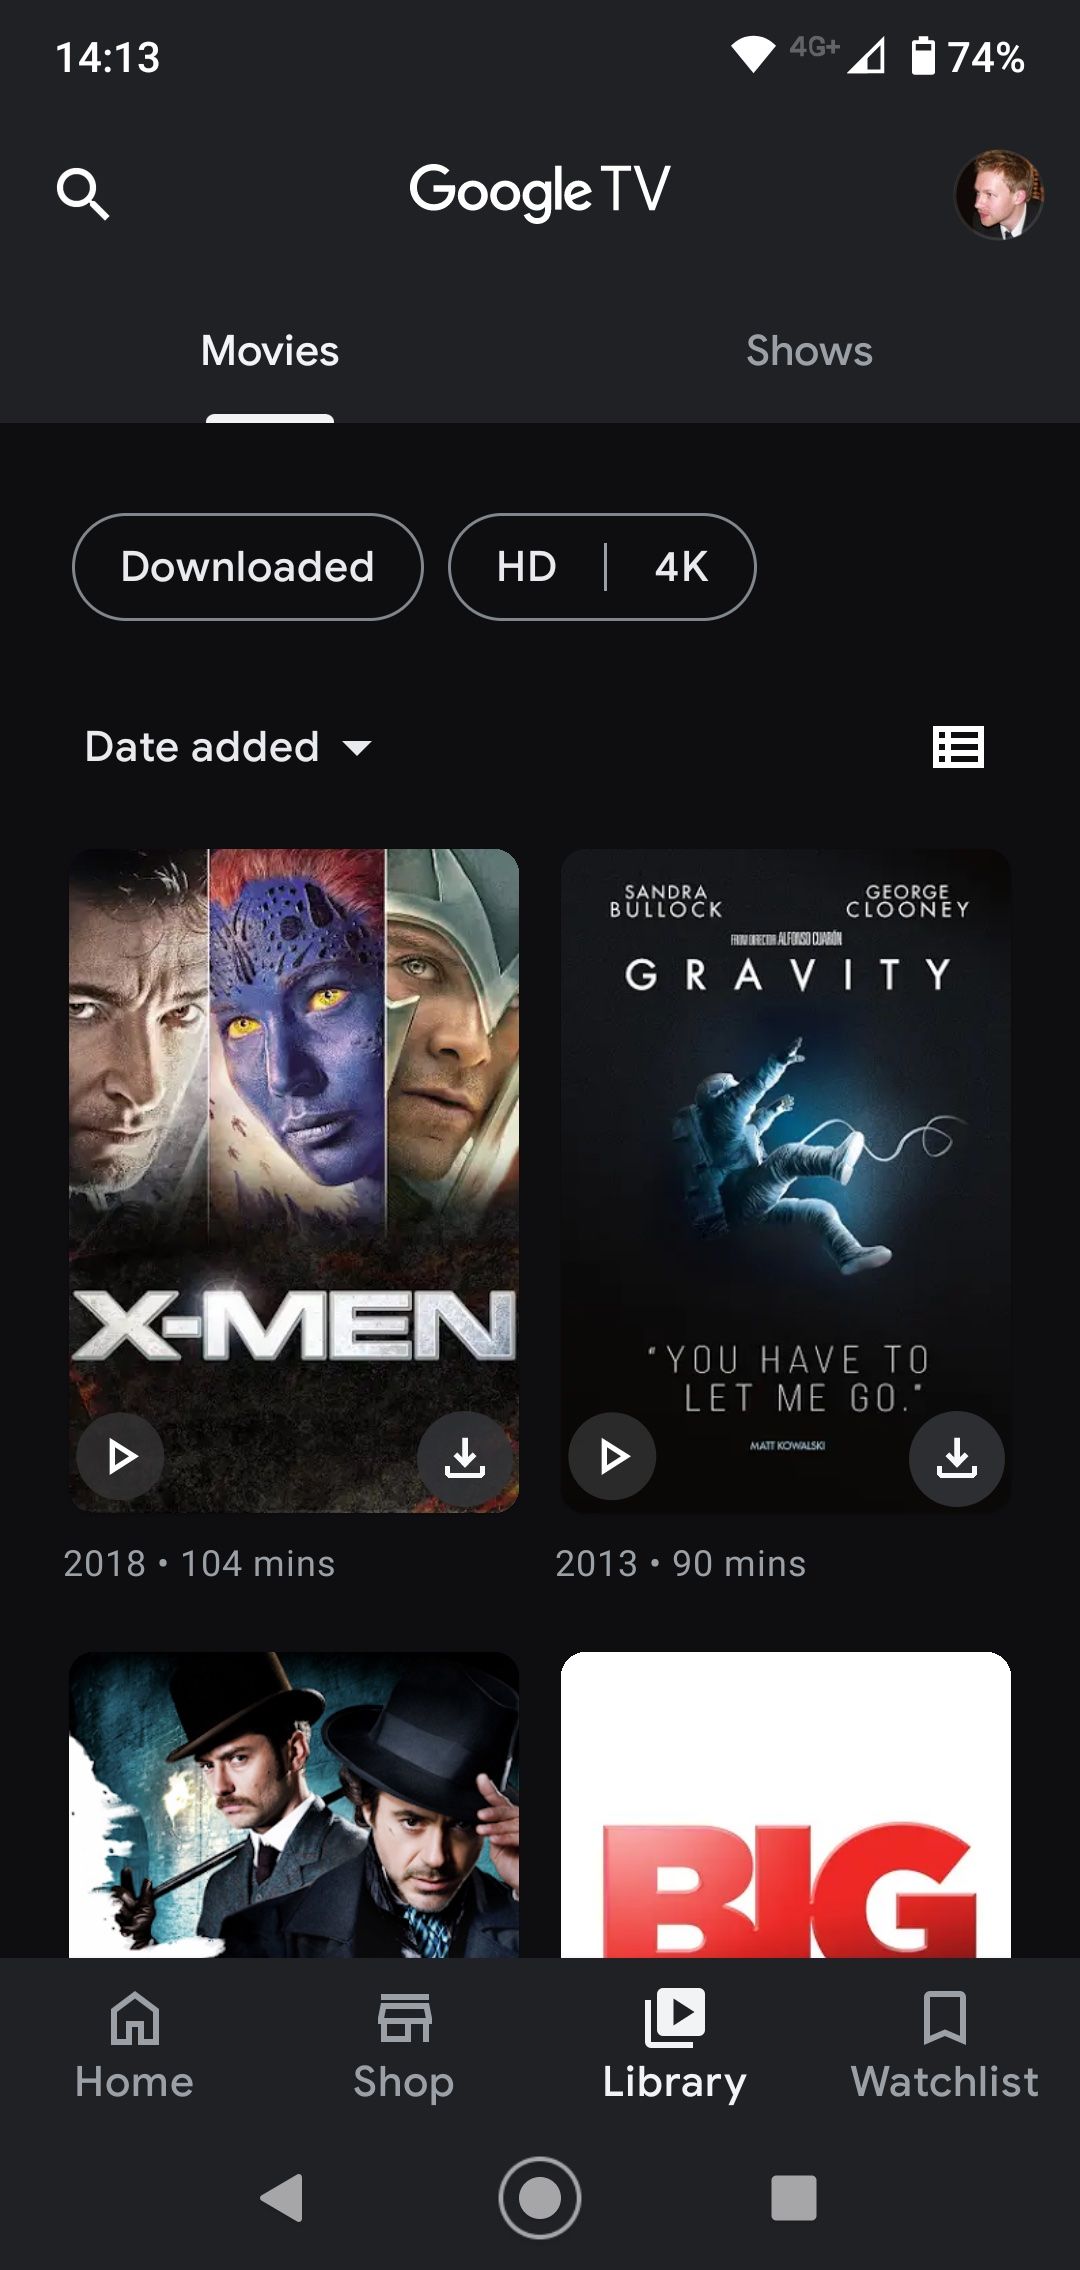 where can i legally download movies for free